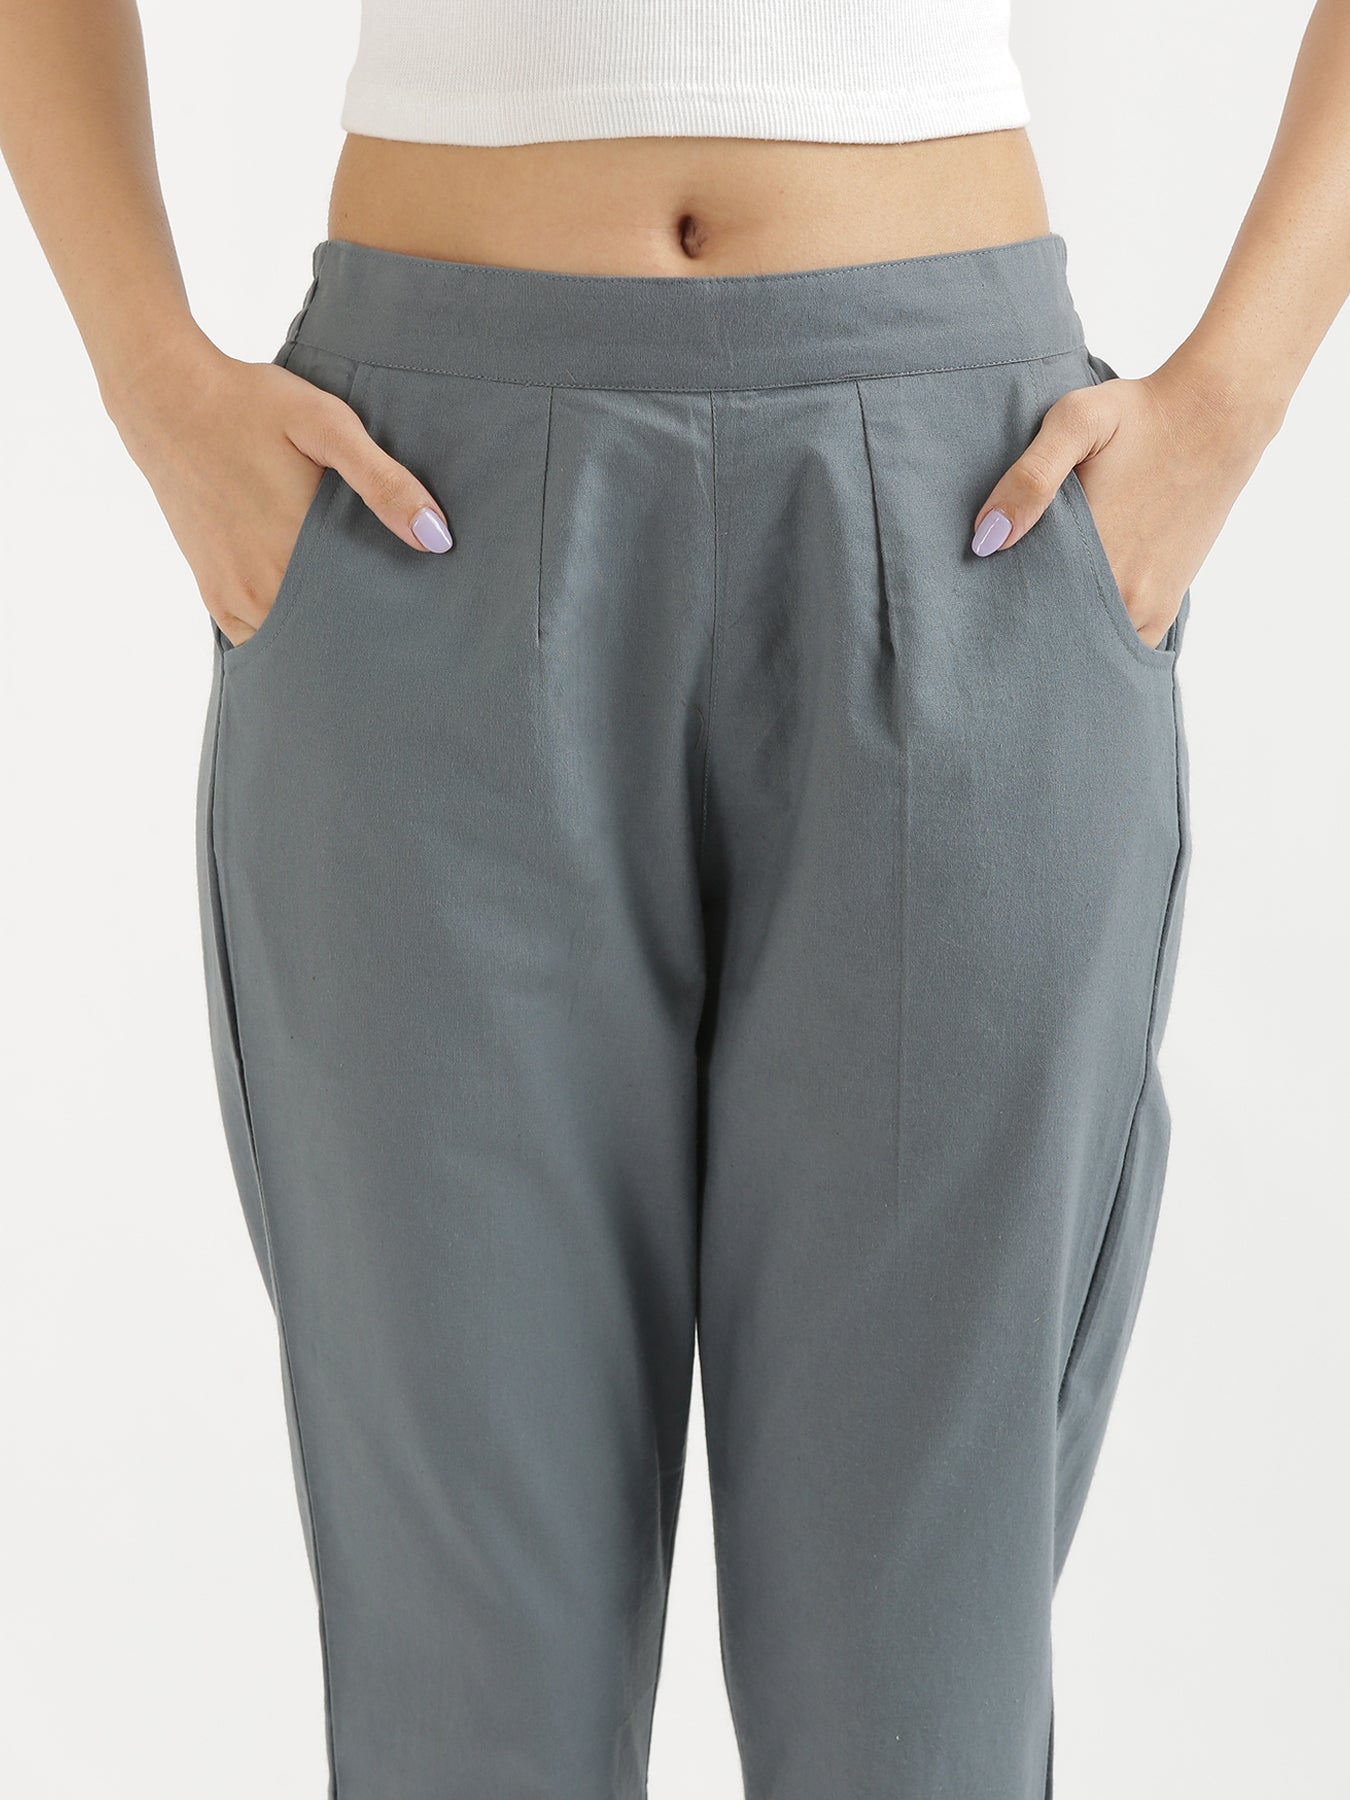 WILLS LIFESTYLE Slim Fit Women Grey Trousers - Buy WILLS LIFESTYLE Slim Fit Women  Grey Trousers Online at Best Prices in India | Flipkart.com